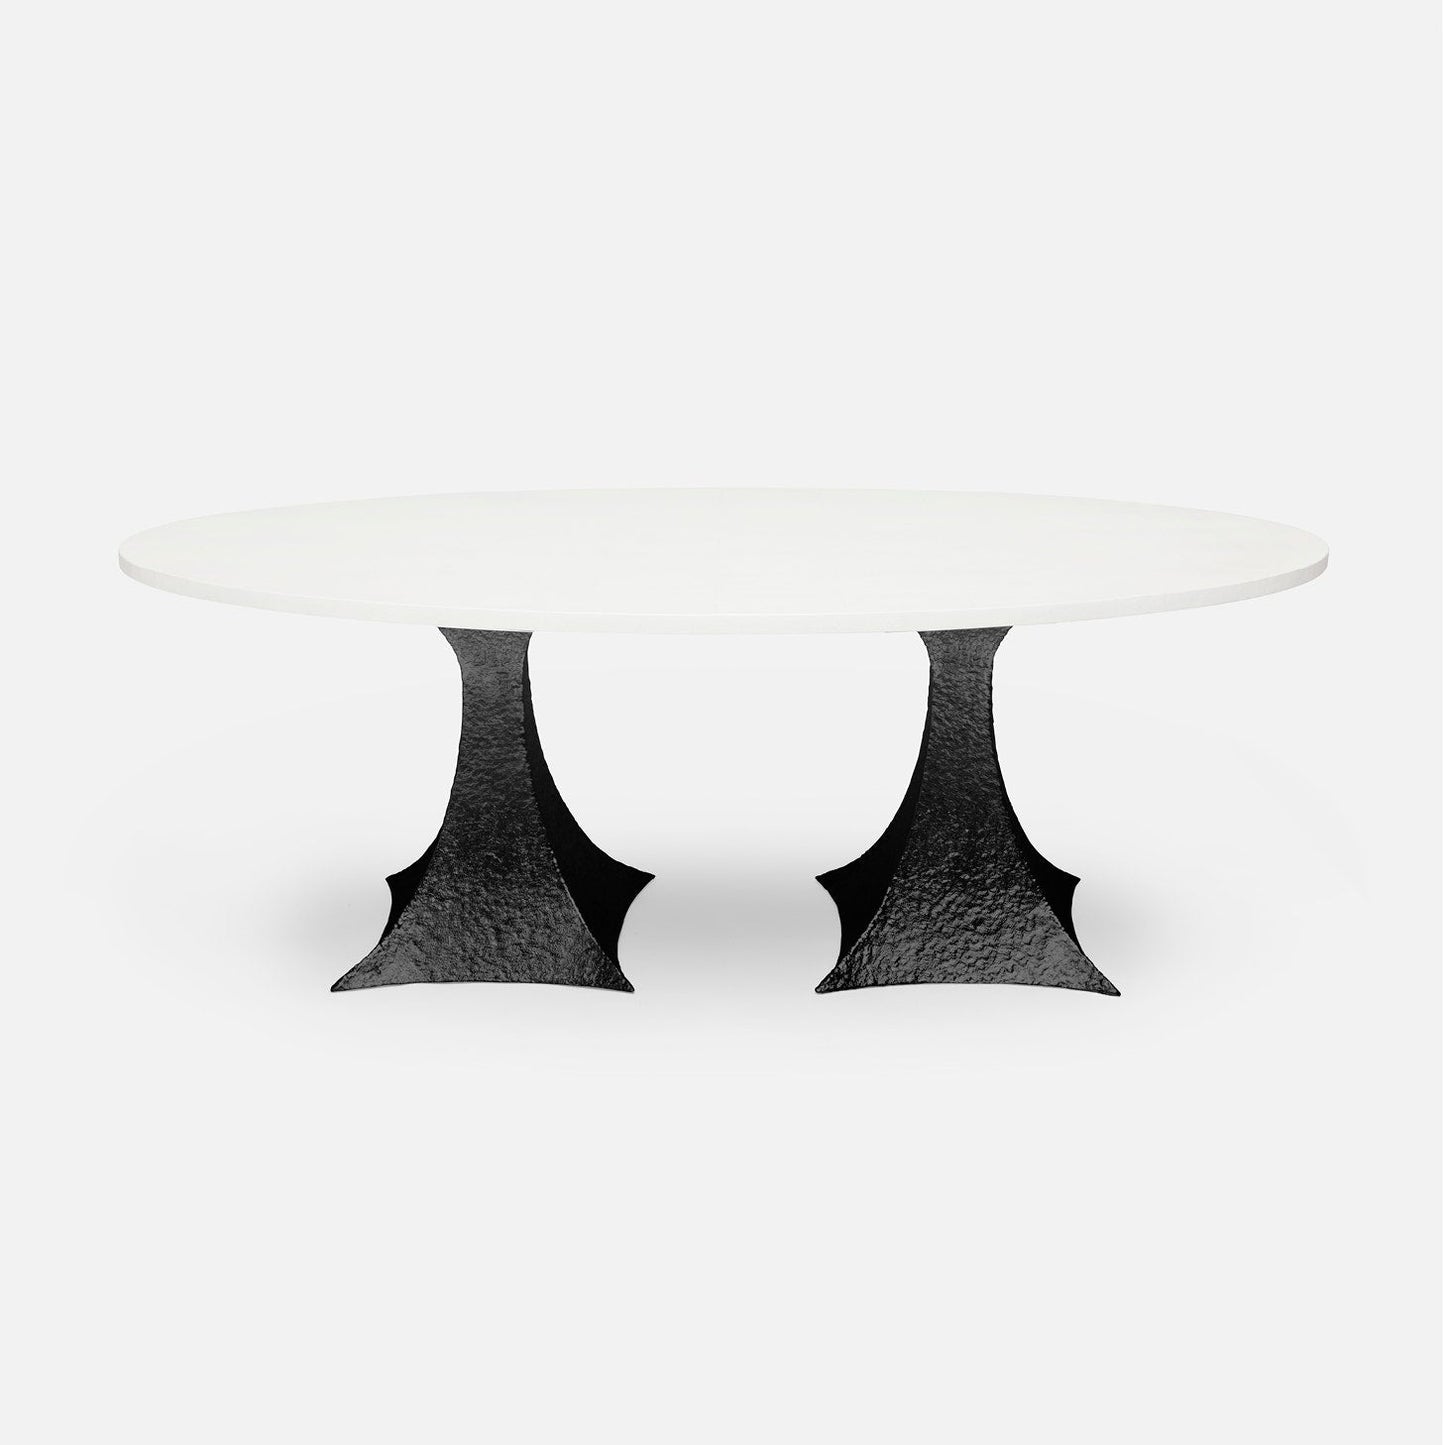 Made Goods Noor 84" x 42" x 30" Double Base Bumpy Black Iron Dinning Table With Oval Pristine Vintage Faux Shagreen Table Top